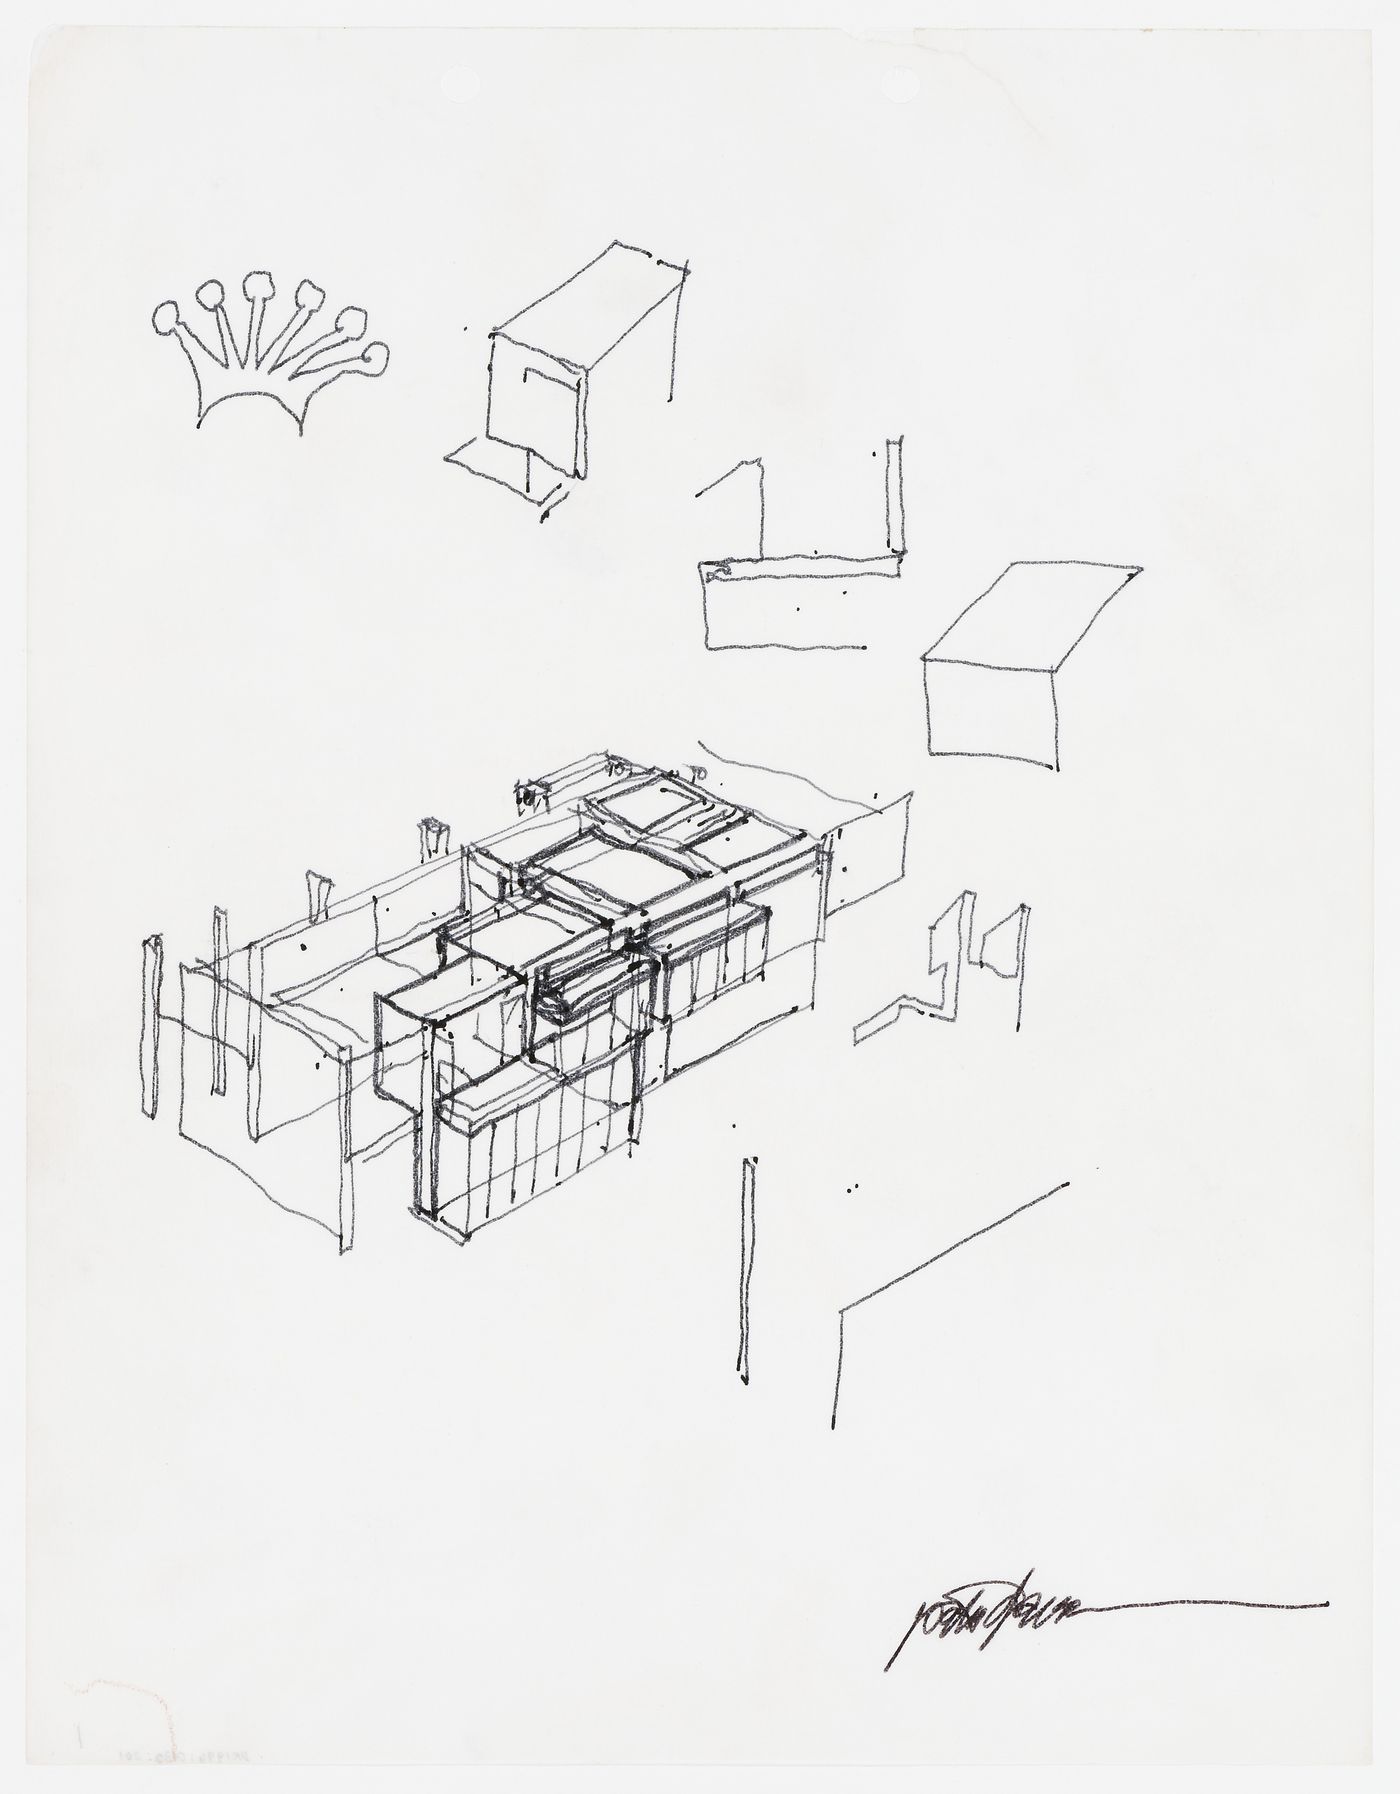 House II (Falk House), Hardwick, Vermont: perspective sketches